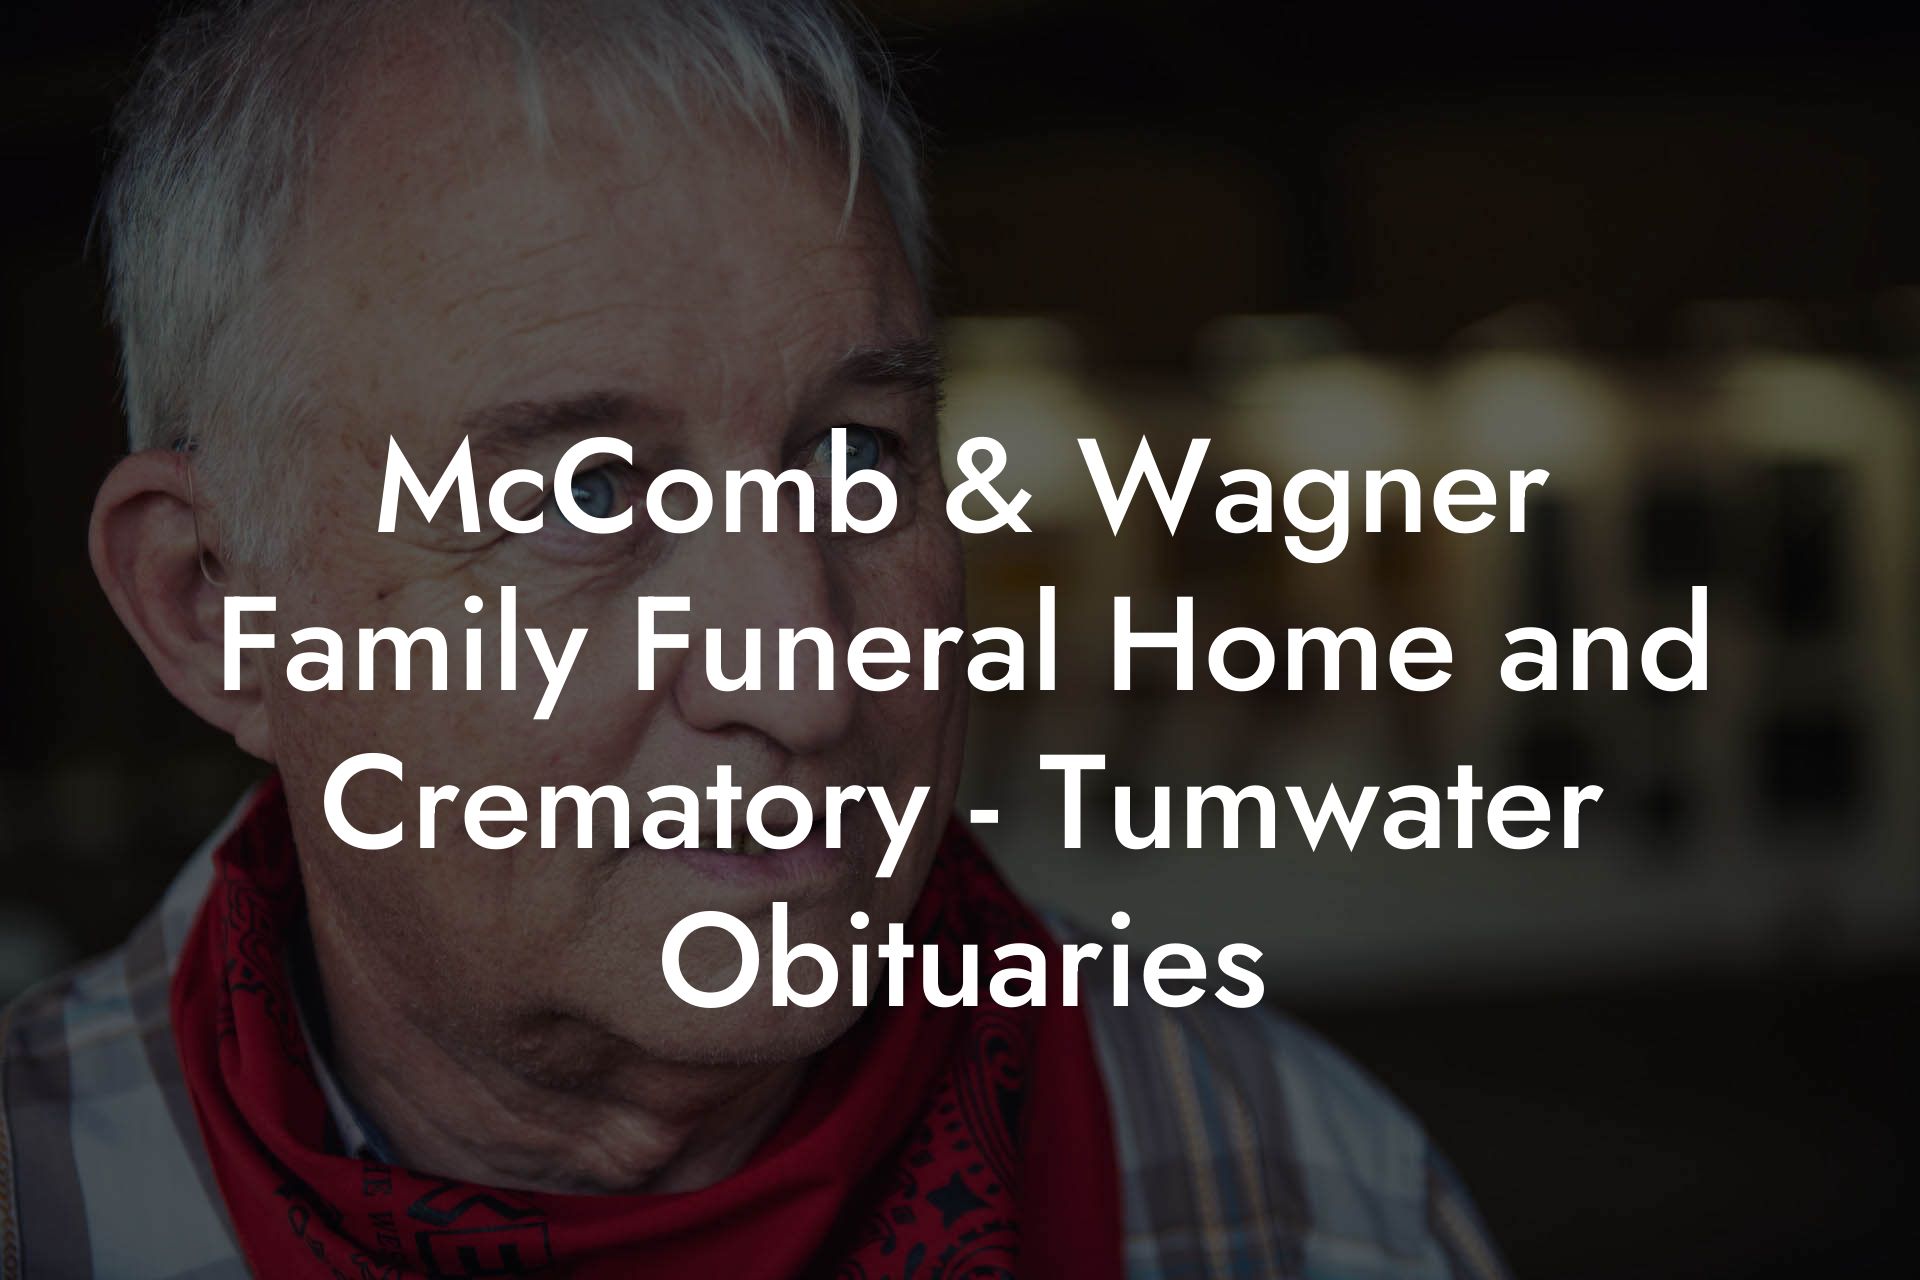 McComb & Wagner Family Funeral Home and Crematory - Tumwater Obituaries